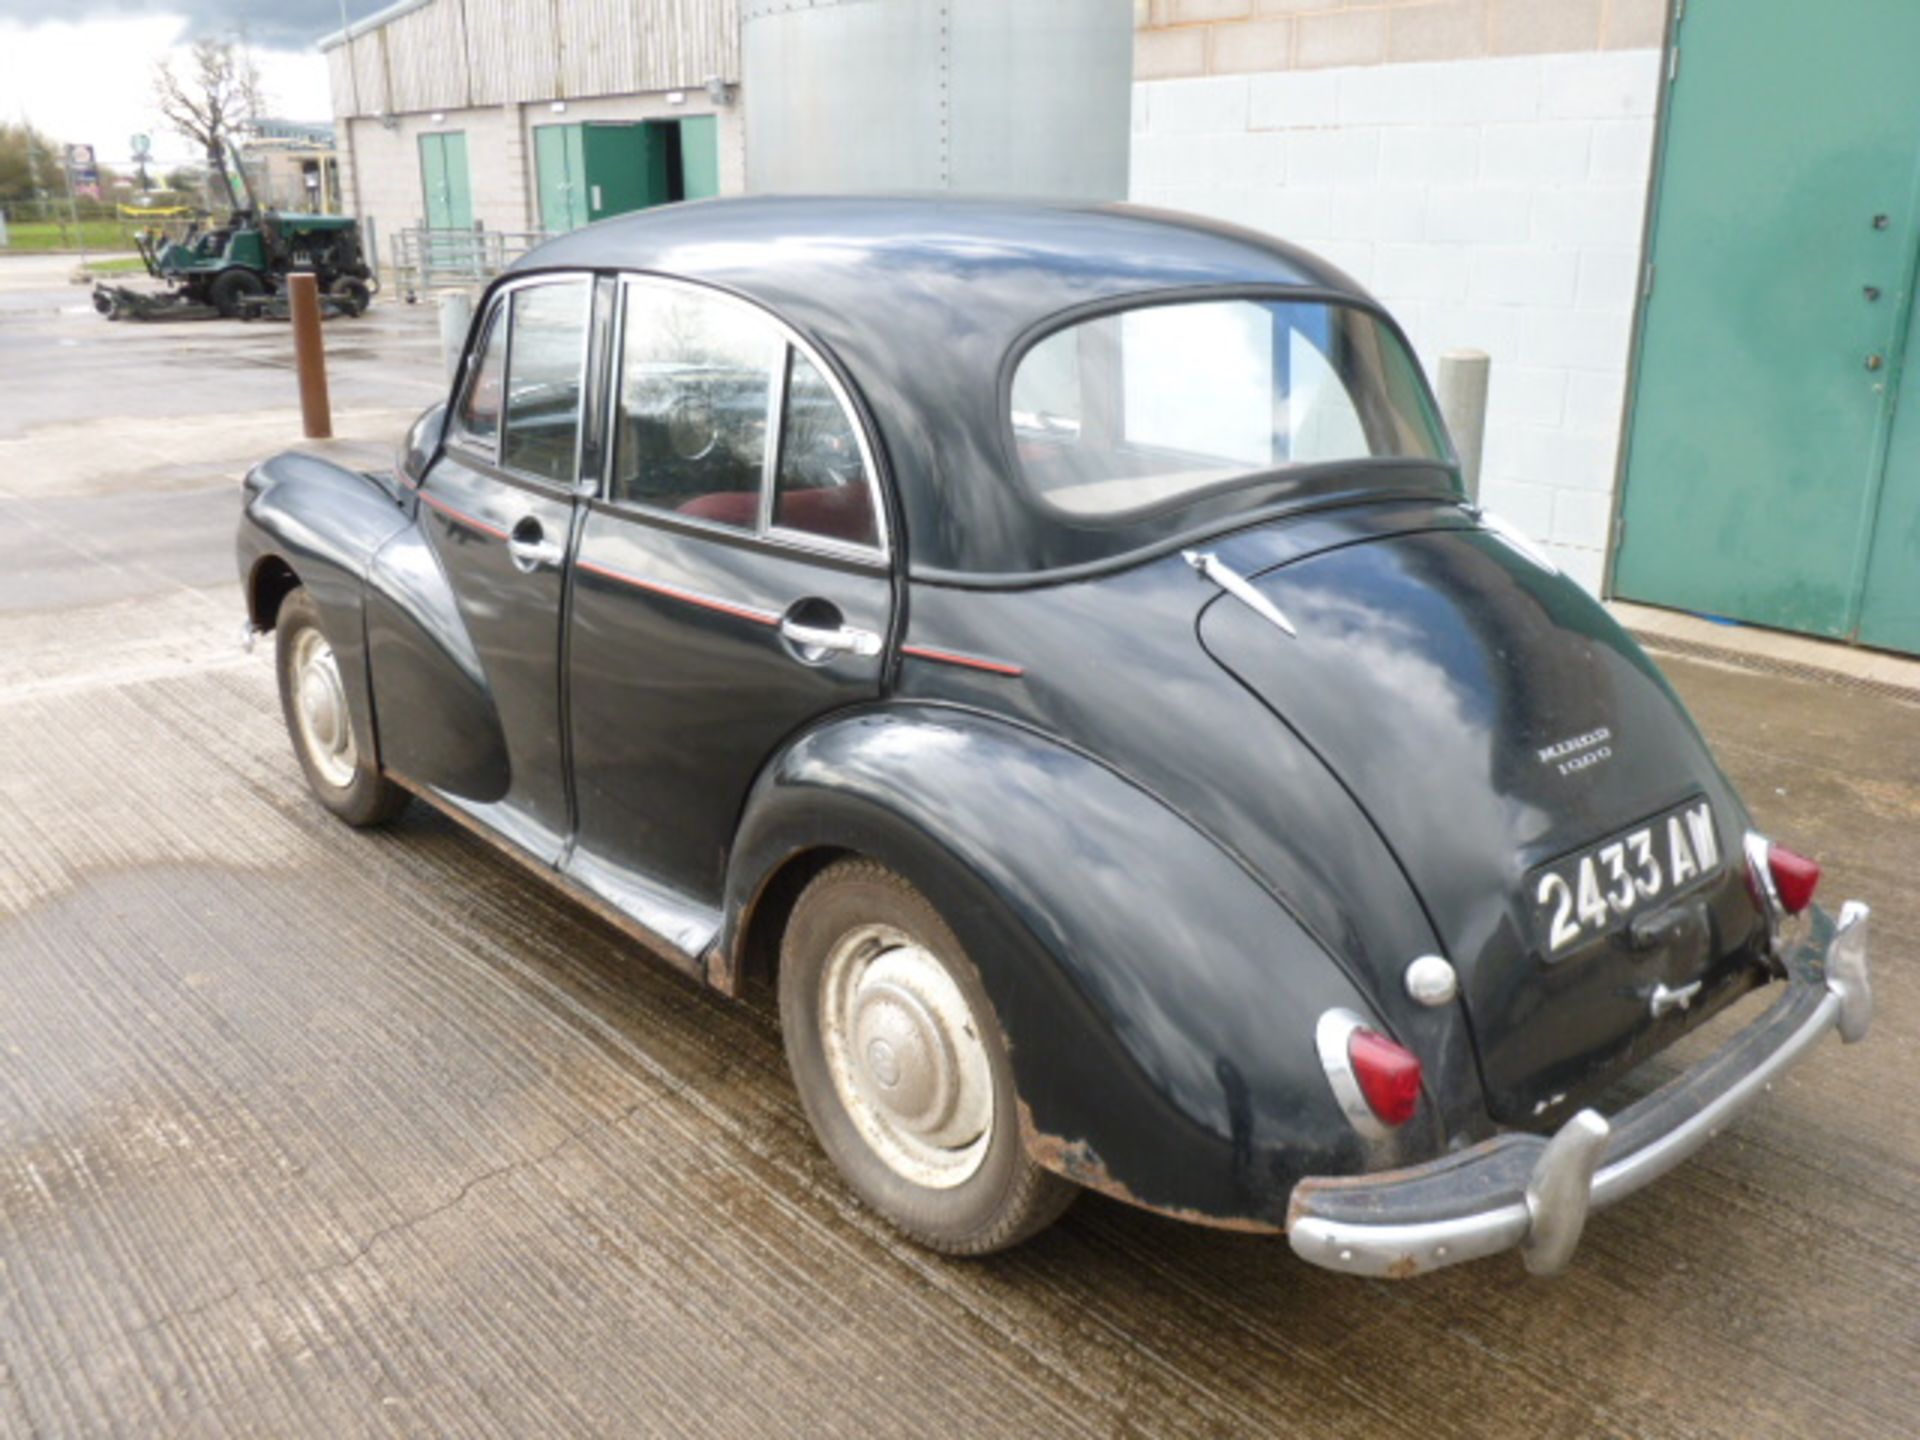 1963 MORRIS MINOR 1000 2433AW 4805HRS - Image 5 of 11